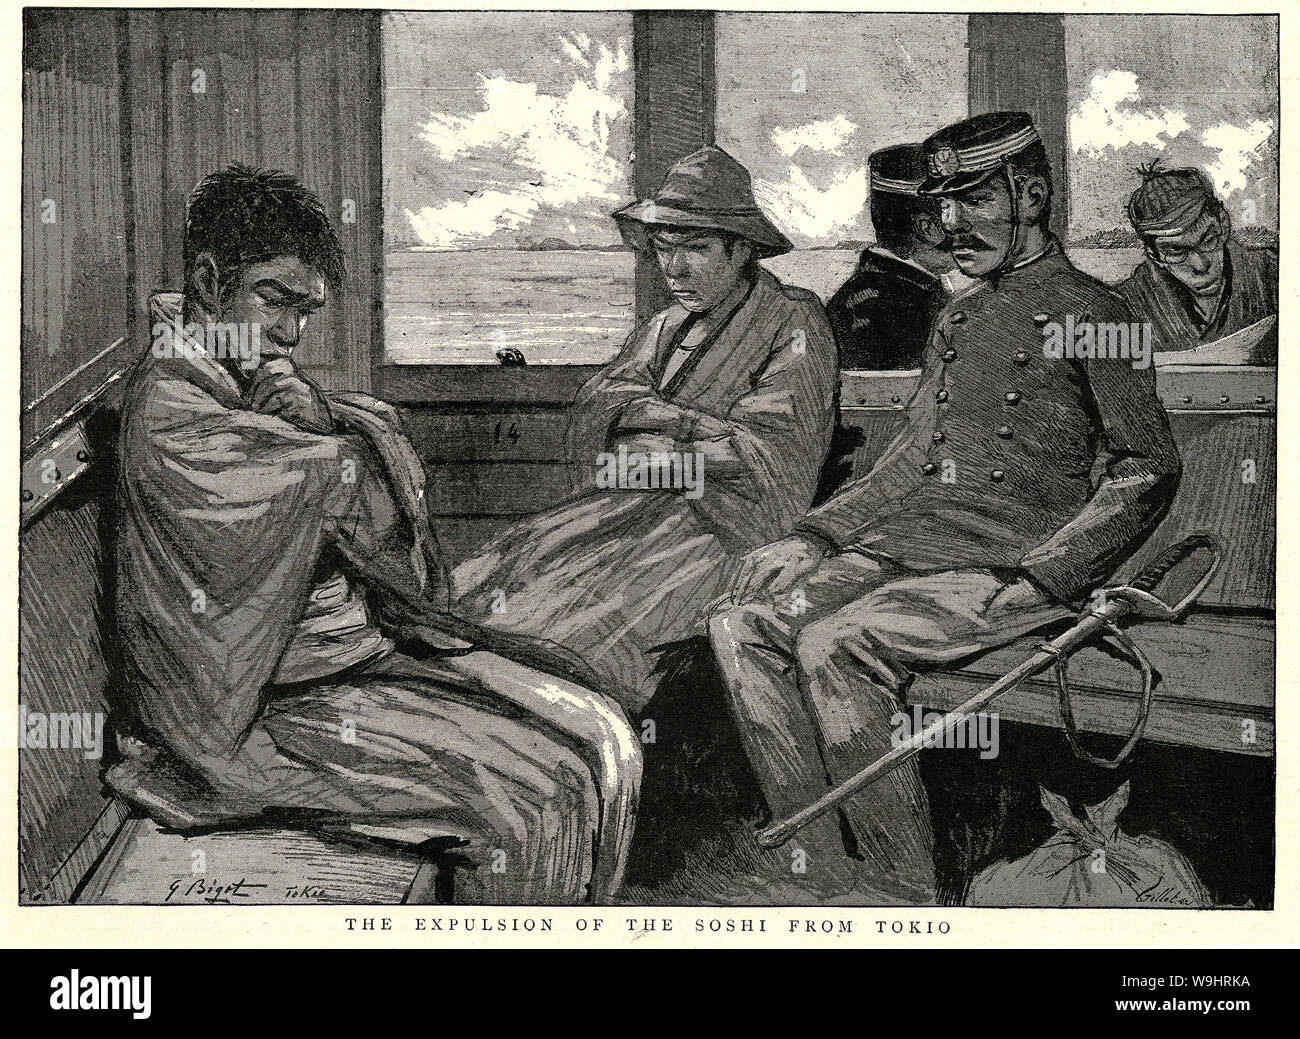 [ 1890s Japan - Japanese Prisoners and Police ] —   A police officer escorts a potential troublemaker on a train.   Published in the British weekly illustrated newspaper The Graphic on April 15, 1893 (Meiji 26).  Original text: 'The expulsion of the soshi (壮士) from Tokyo.'  19th century vintage newspaper illustration. Stock Photo